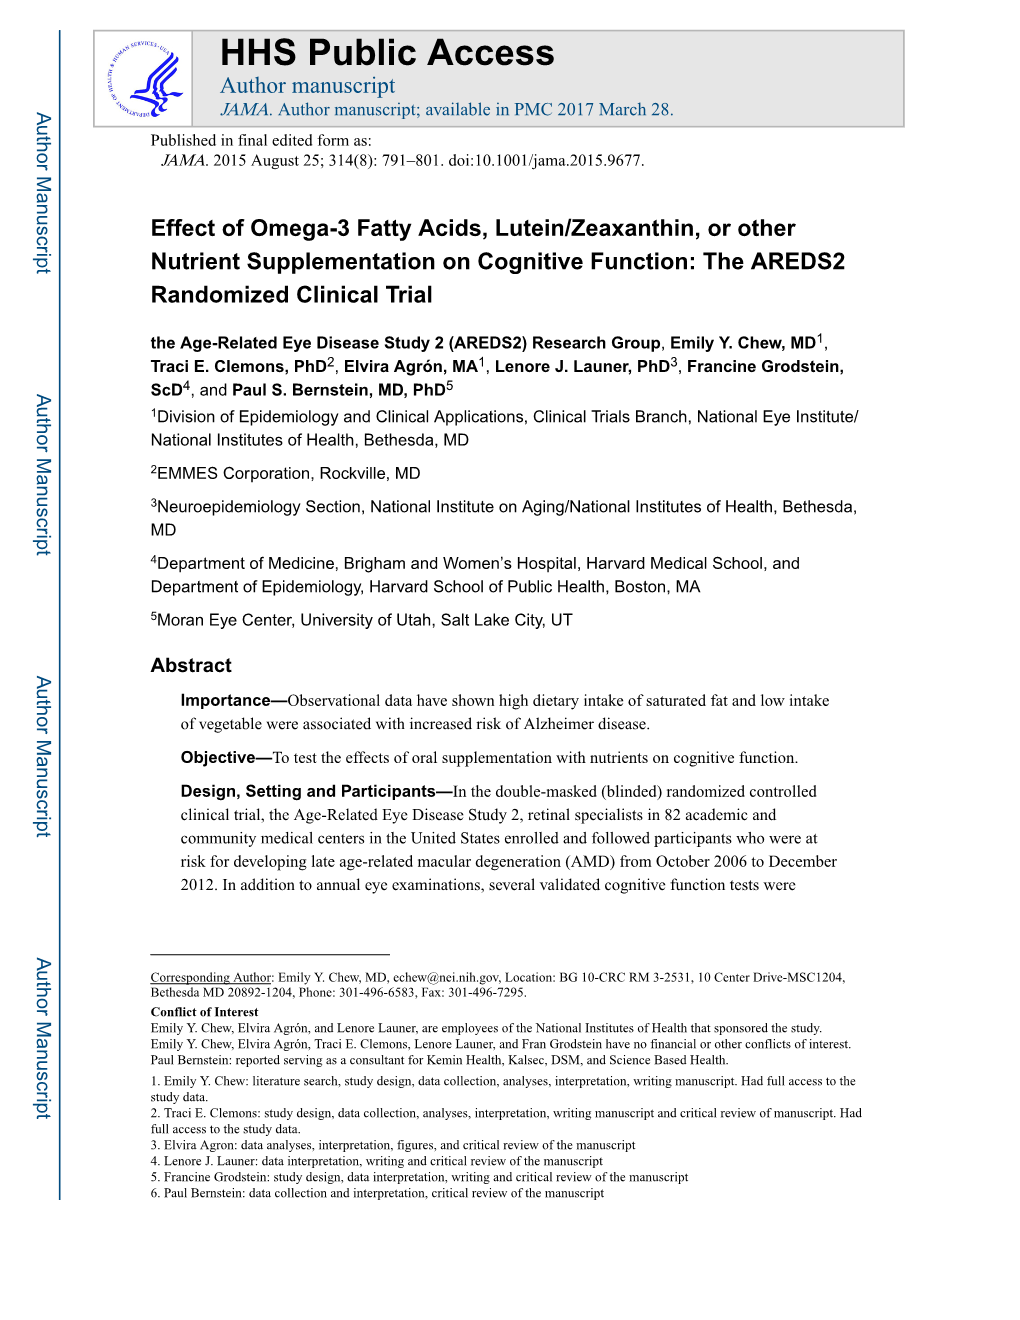 Effect of Omega-3 Fatty Acids, Lutein/Zeaxanthin, Or Other Nutrient Supplementation on Cognitive Function: the AREDS2 Randomized Clinical Trial